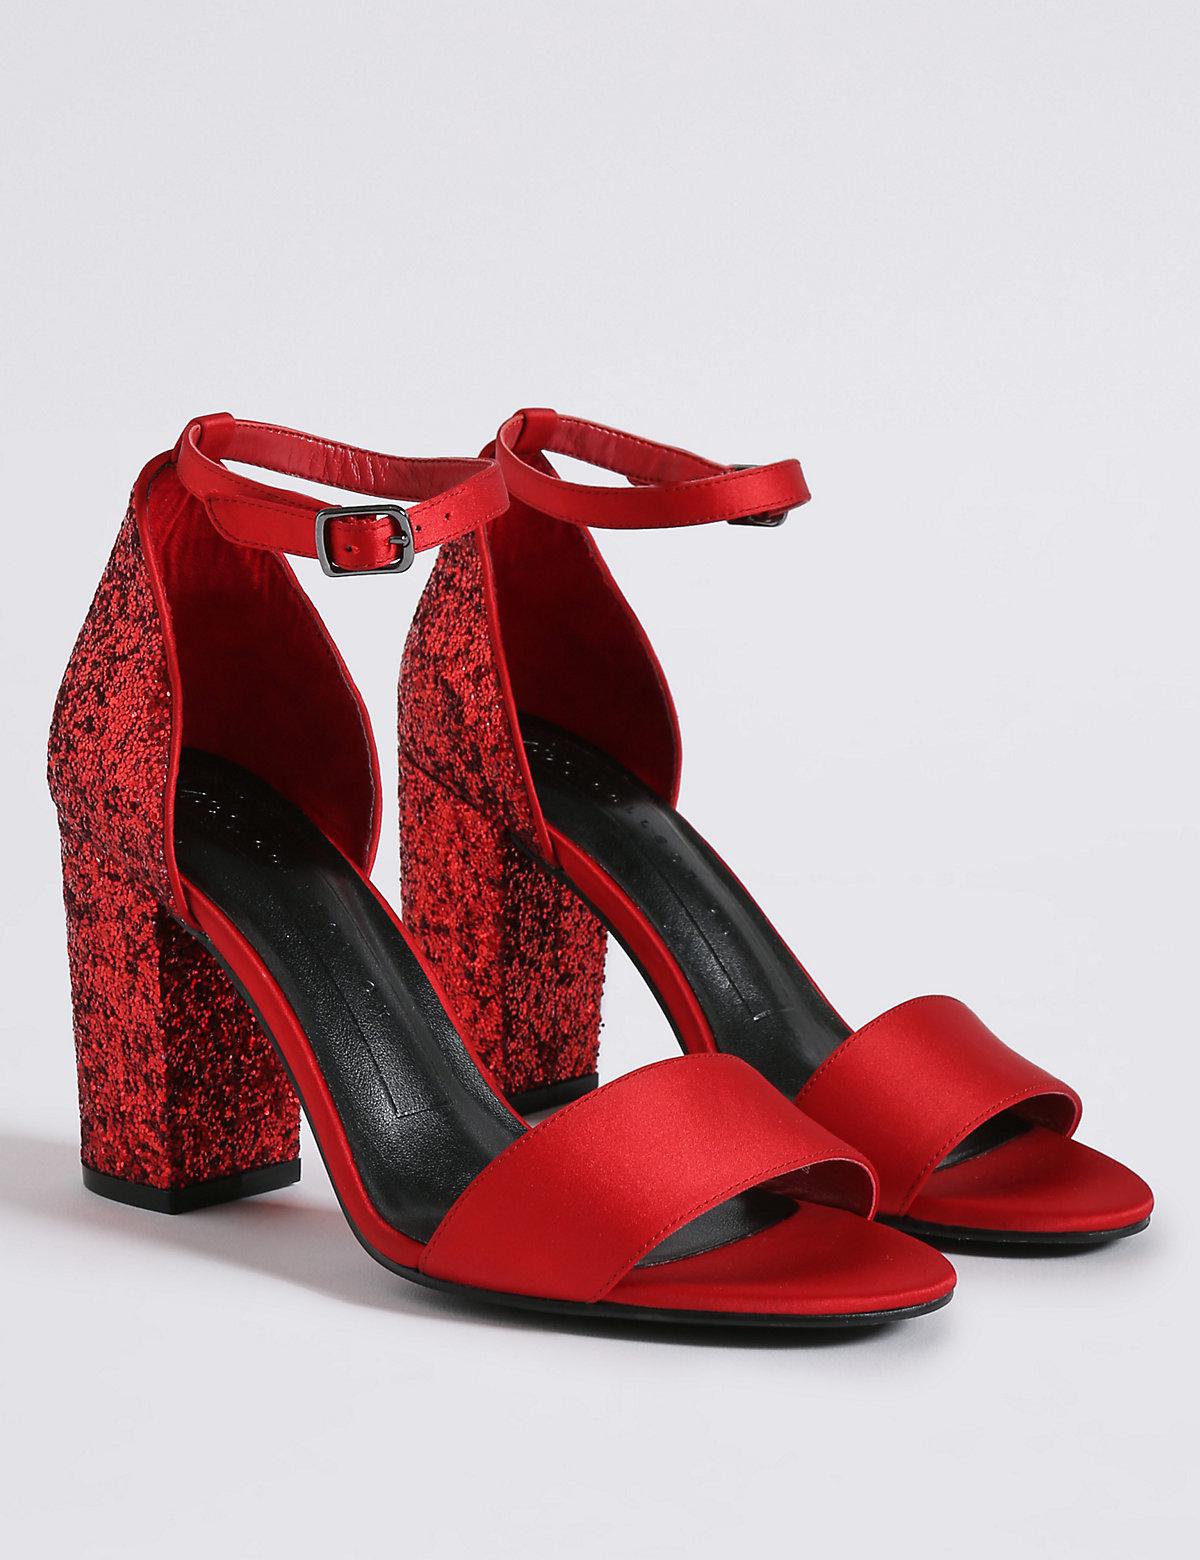 red sparkly block heels \u003e Up to 72% OFF 